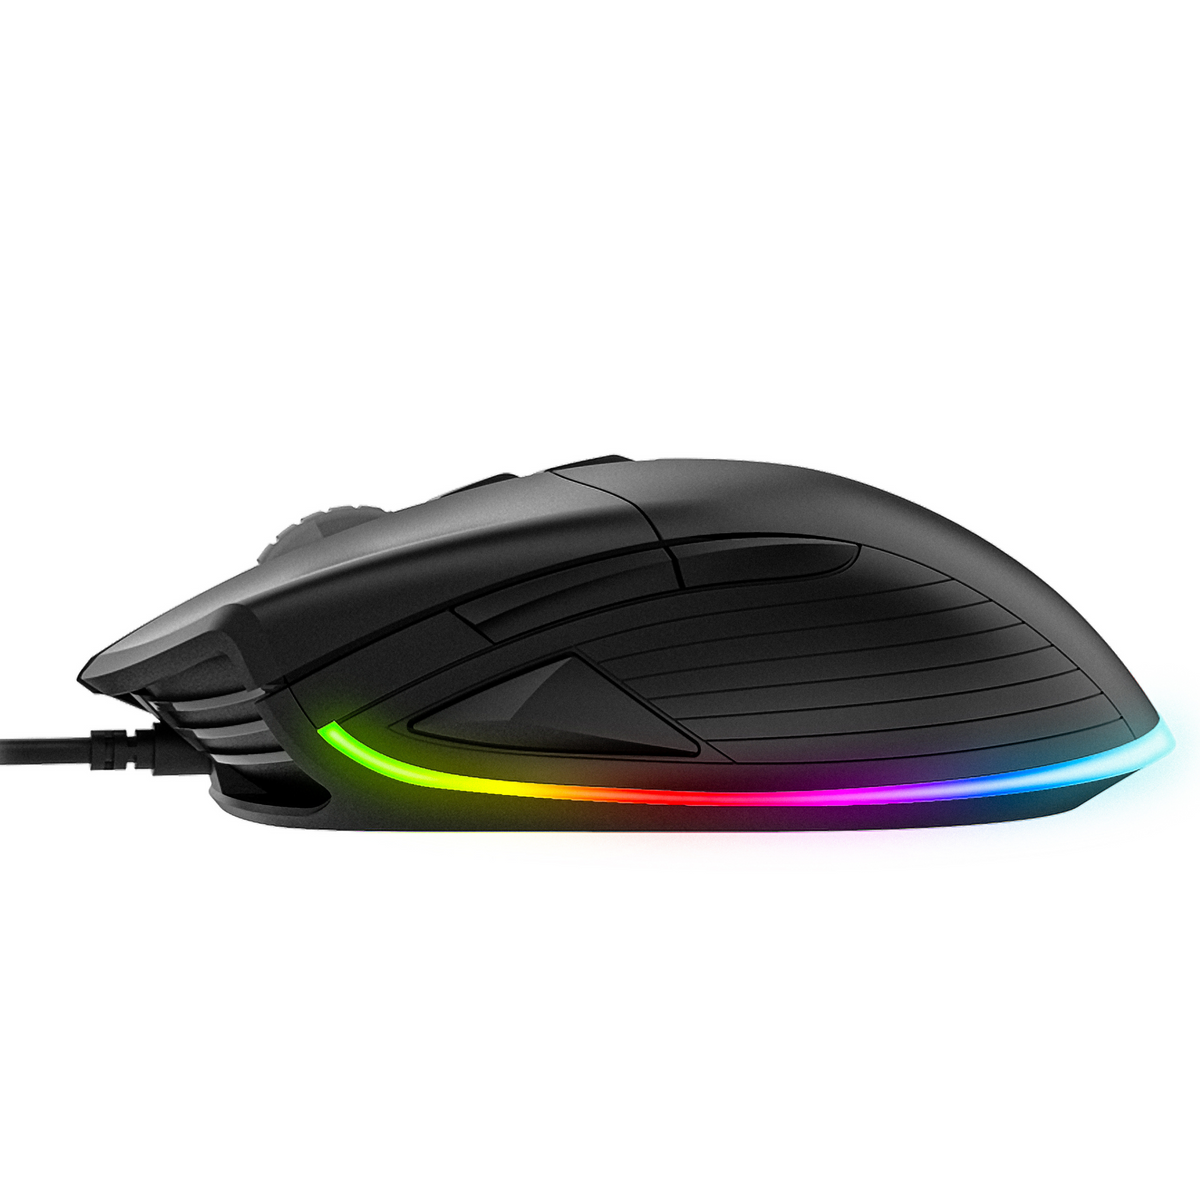 The Mysterious Gamer MX1 Elite Gaming Mouse 3389 Pixart